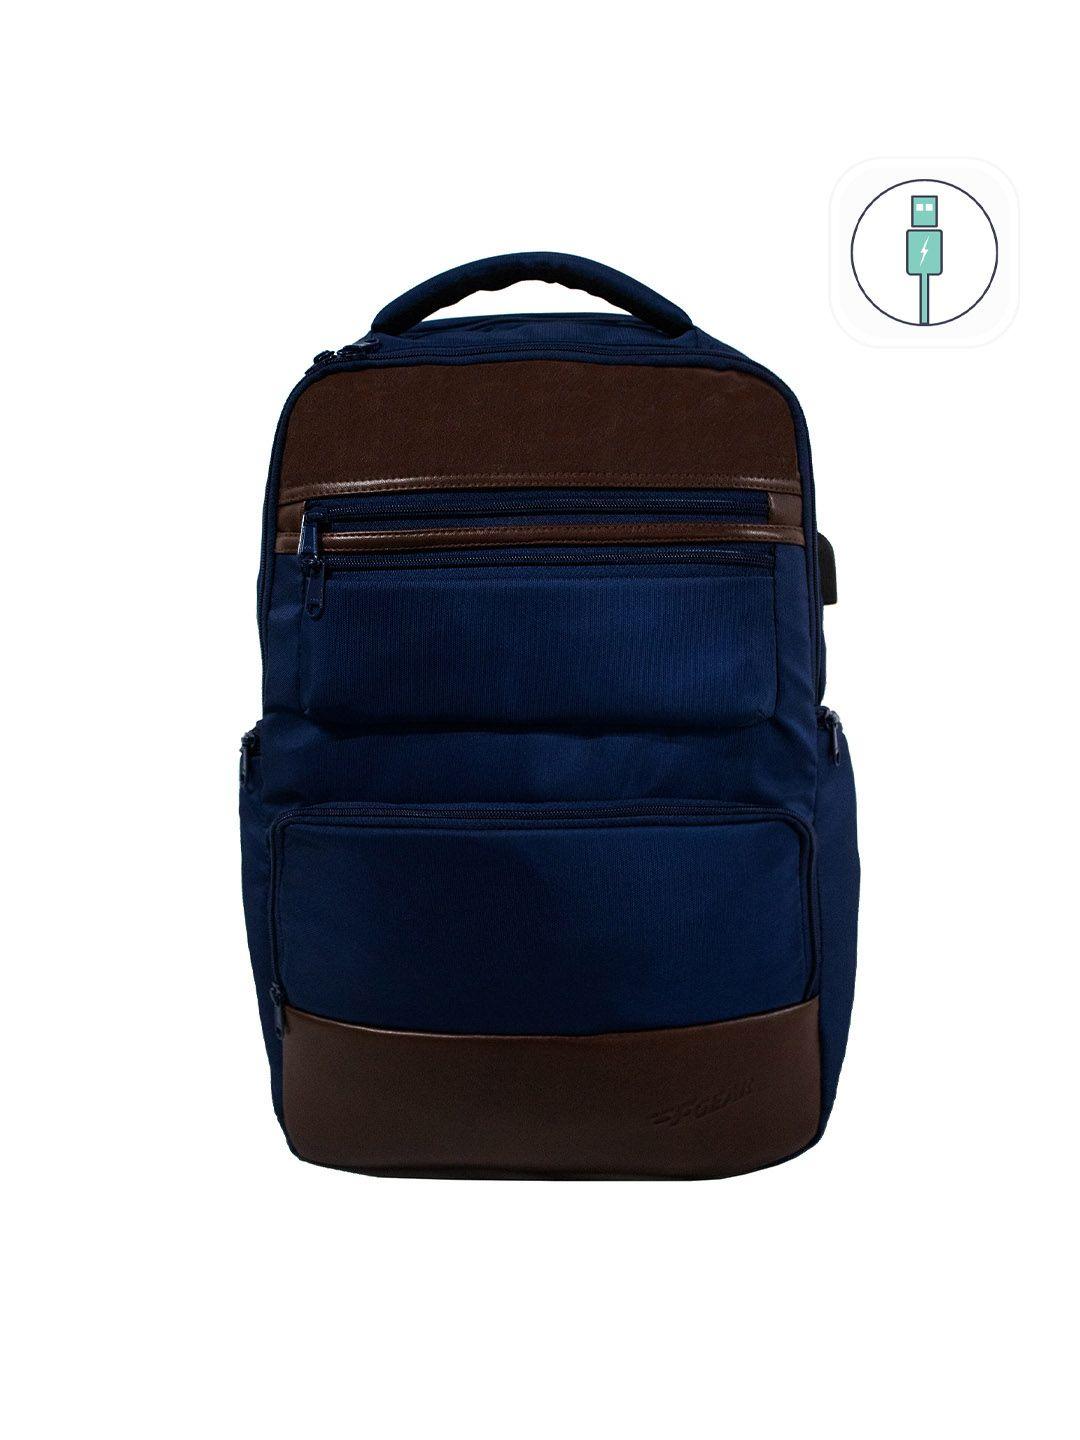 f gear colourblocked large size backpack with usb charging port